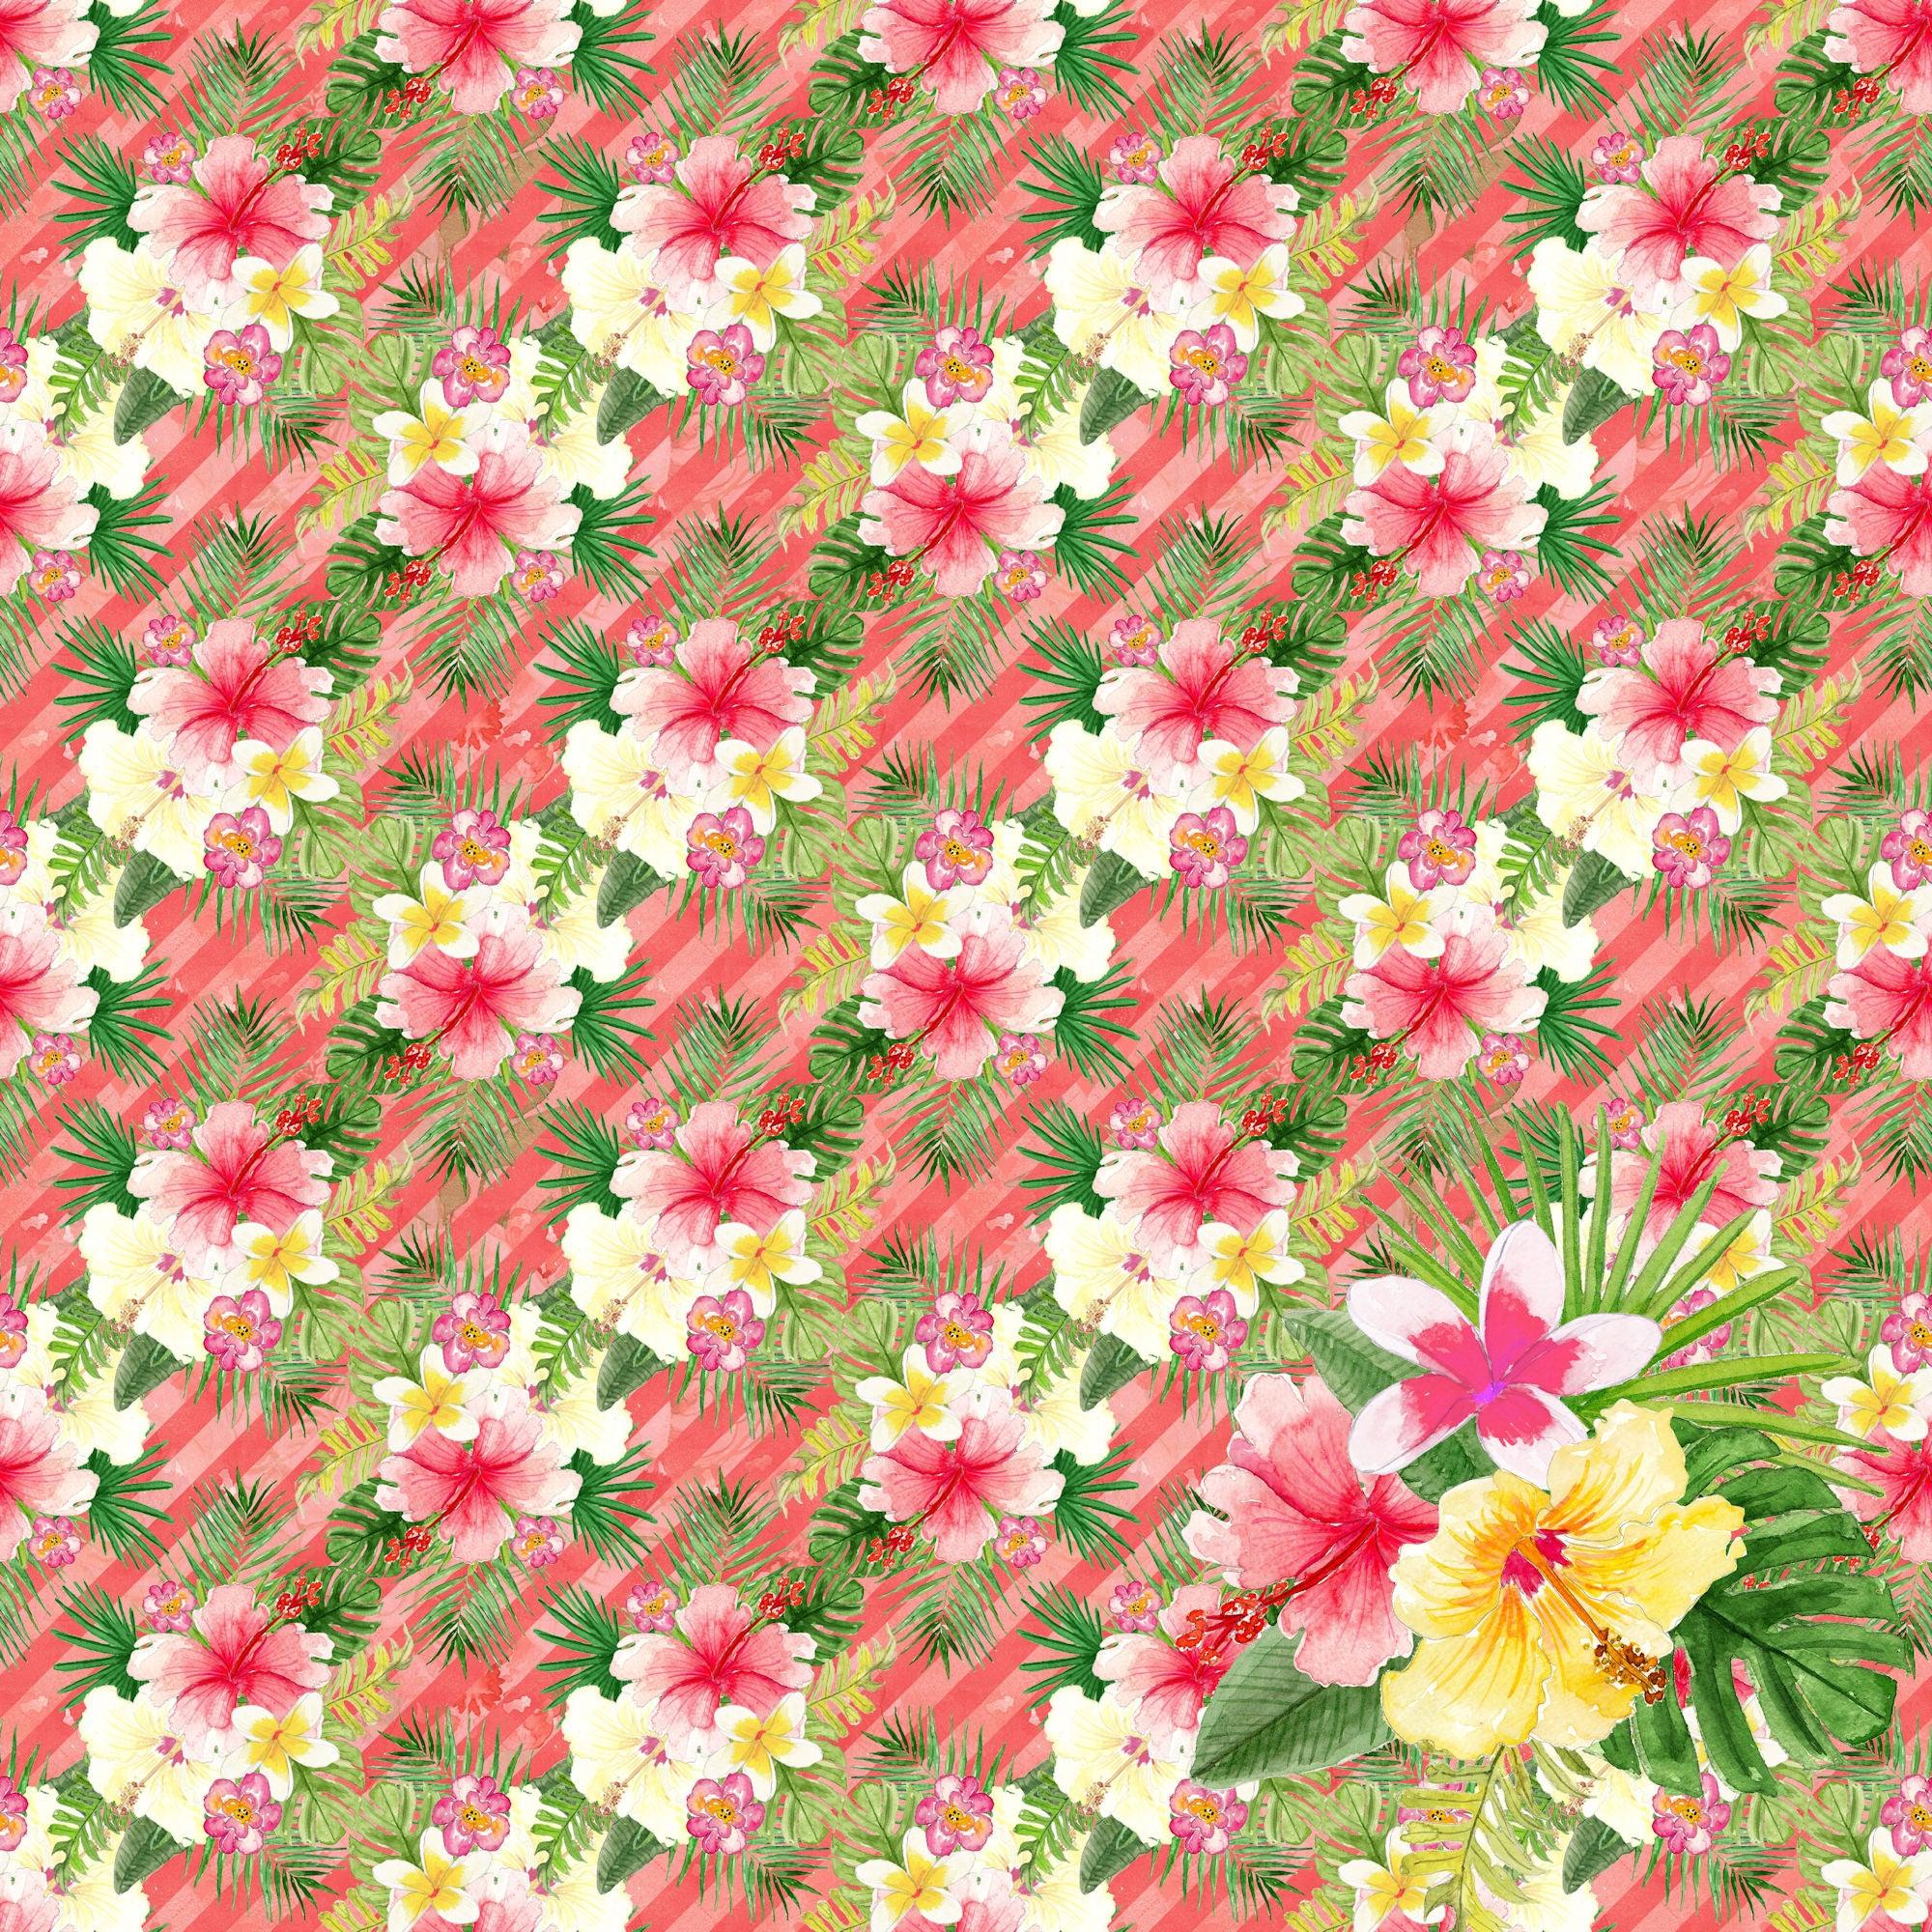 Aloha, Hawaii Collection Oahu 12 x 12 Double-Sided Scrapbook Paper by SSC Designs - Scrapbook Supply Companies